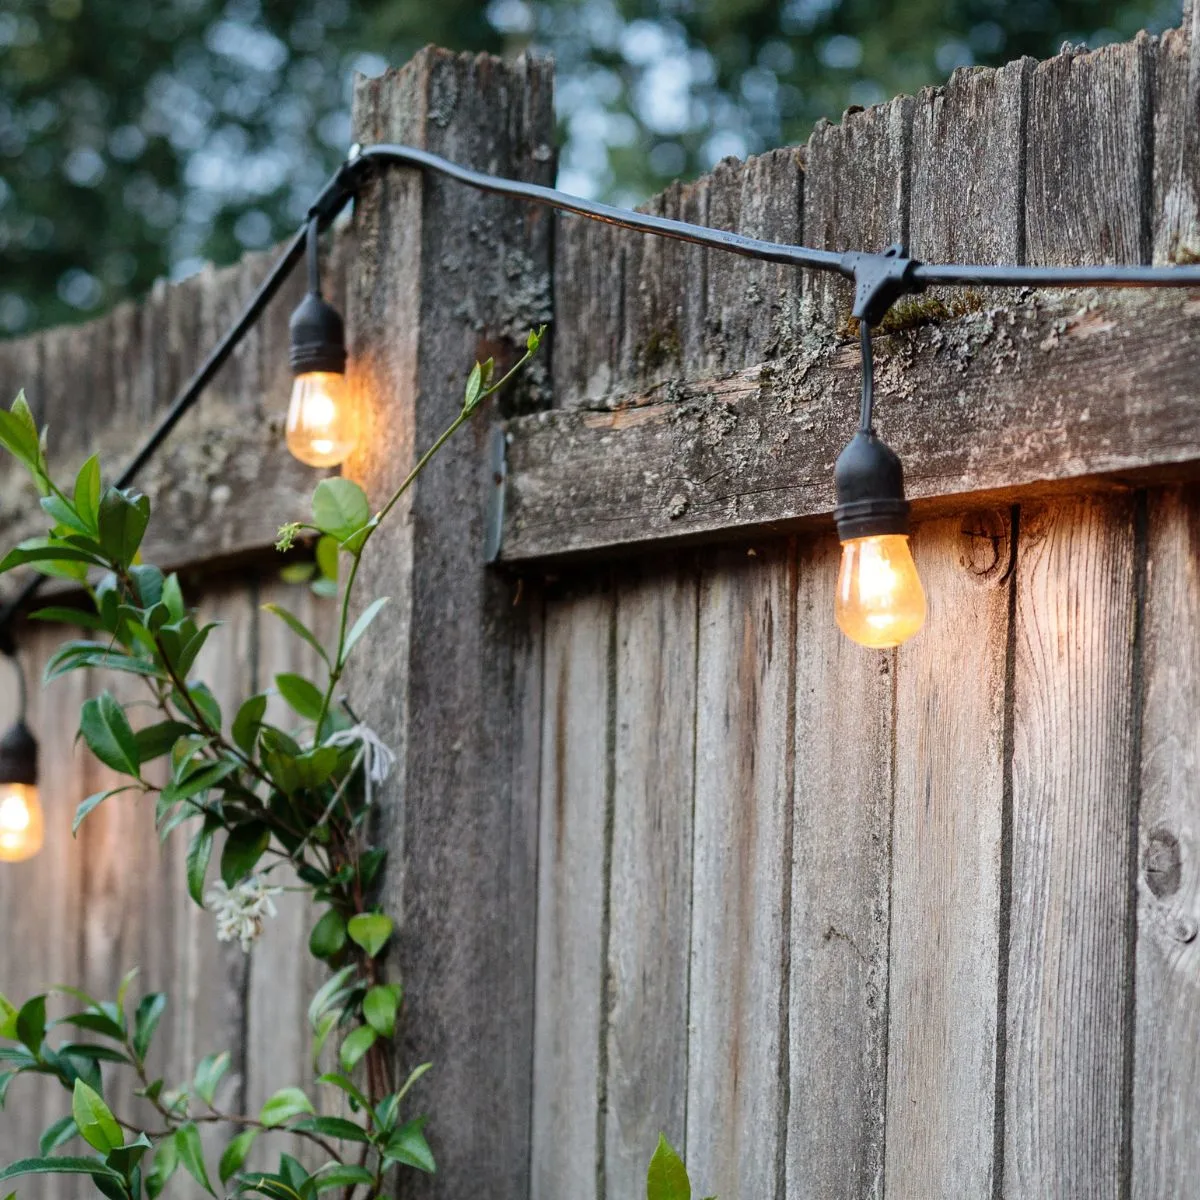 String lights running at the top of a backyard fence.